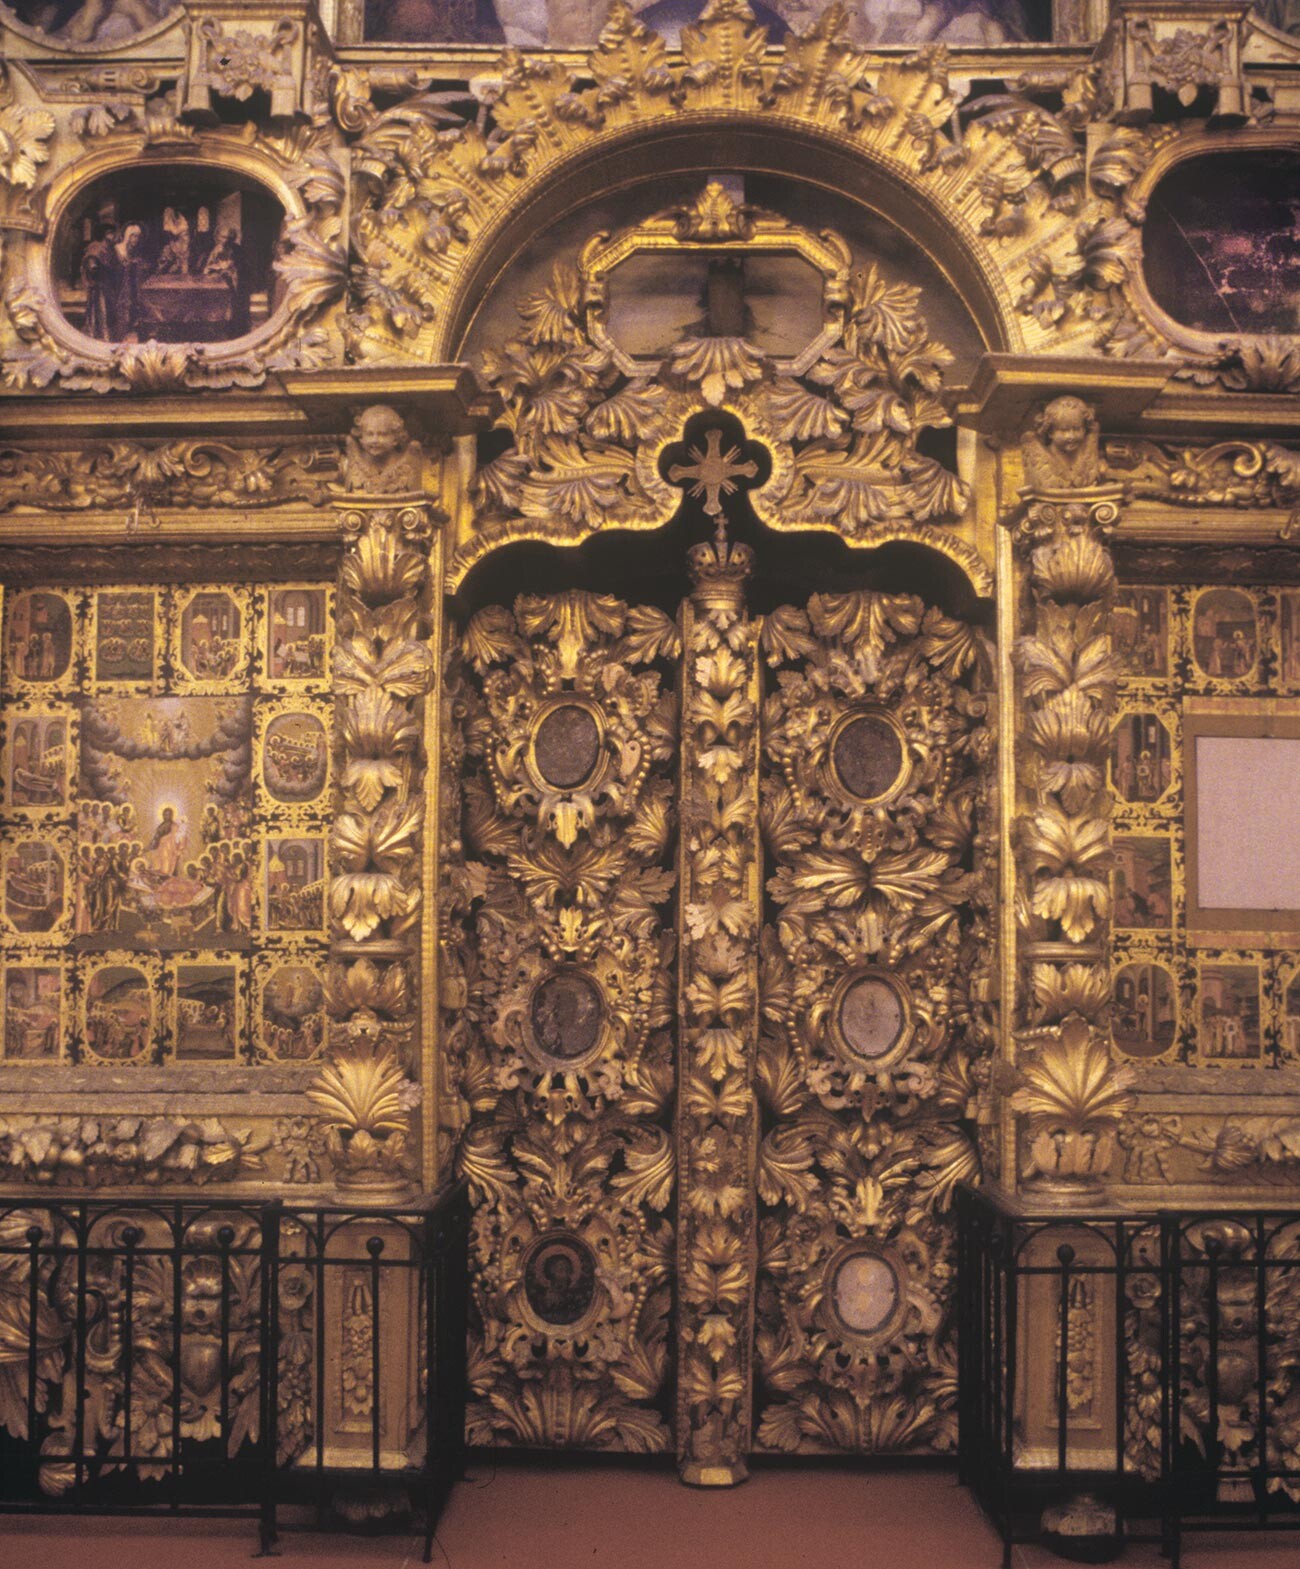 Church of the Intercession at Fili. Icon screen, Royal Gate (entry to altar space). July 2, 1995